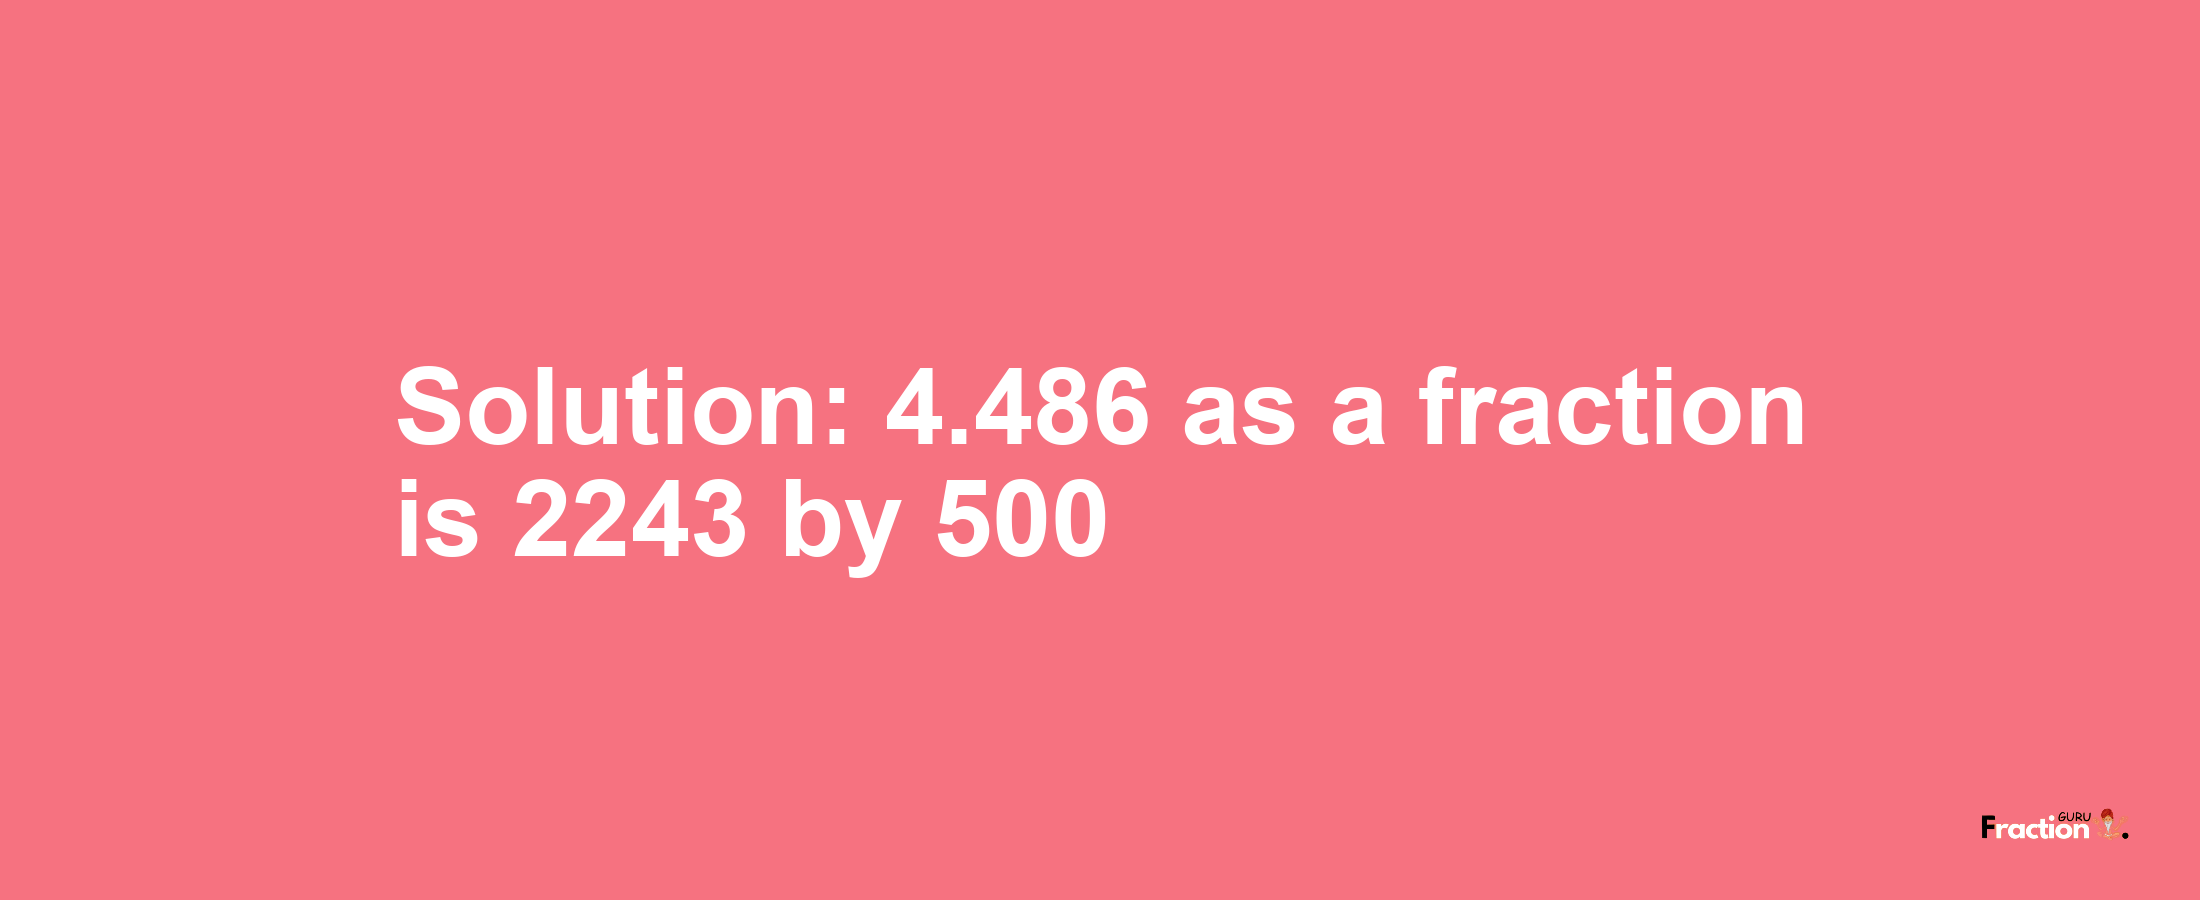 Solution:4.486 as a fraction is 2243/500